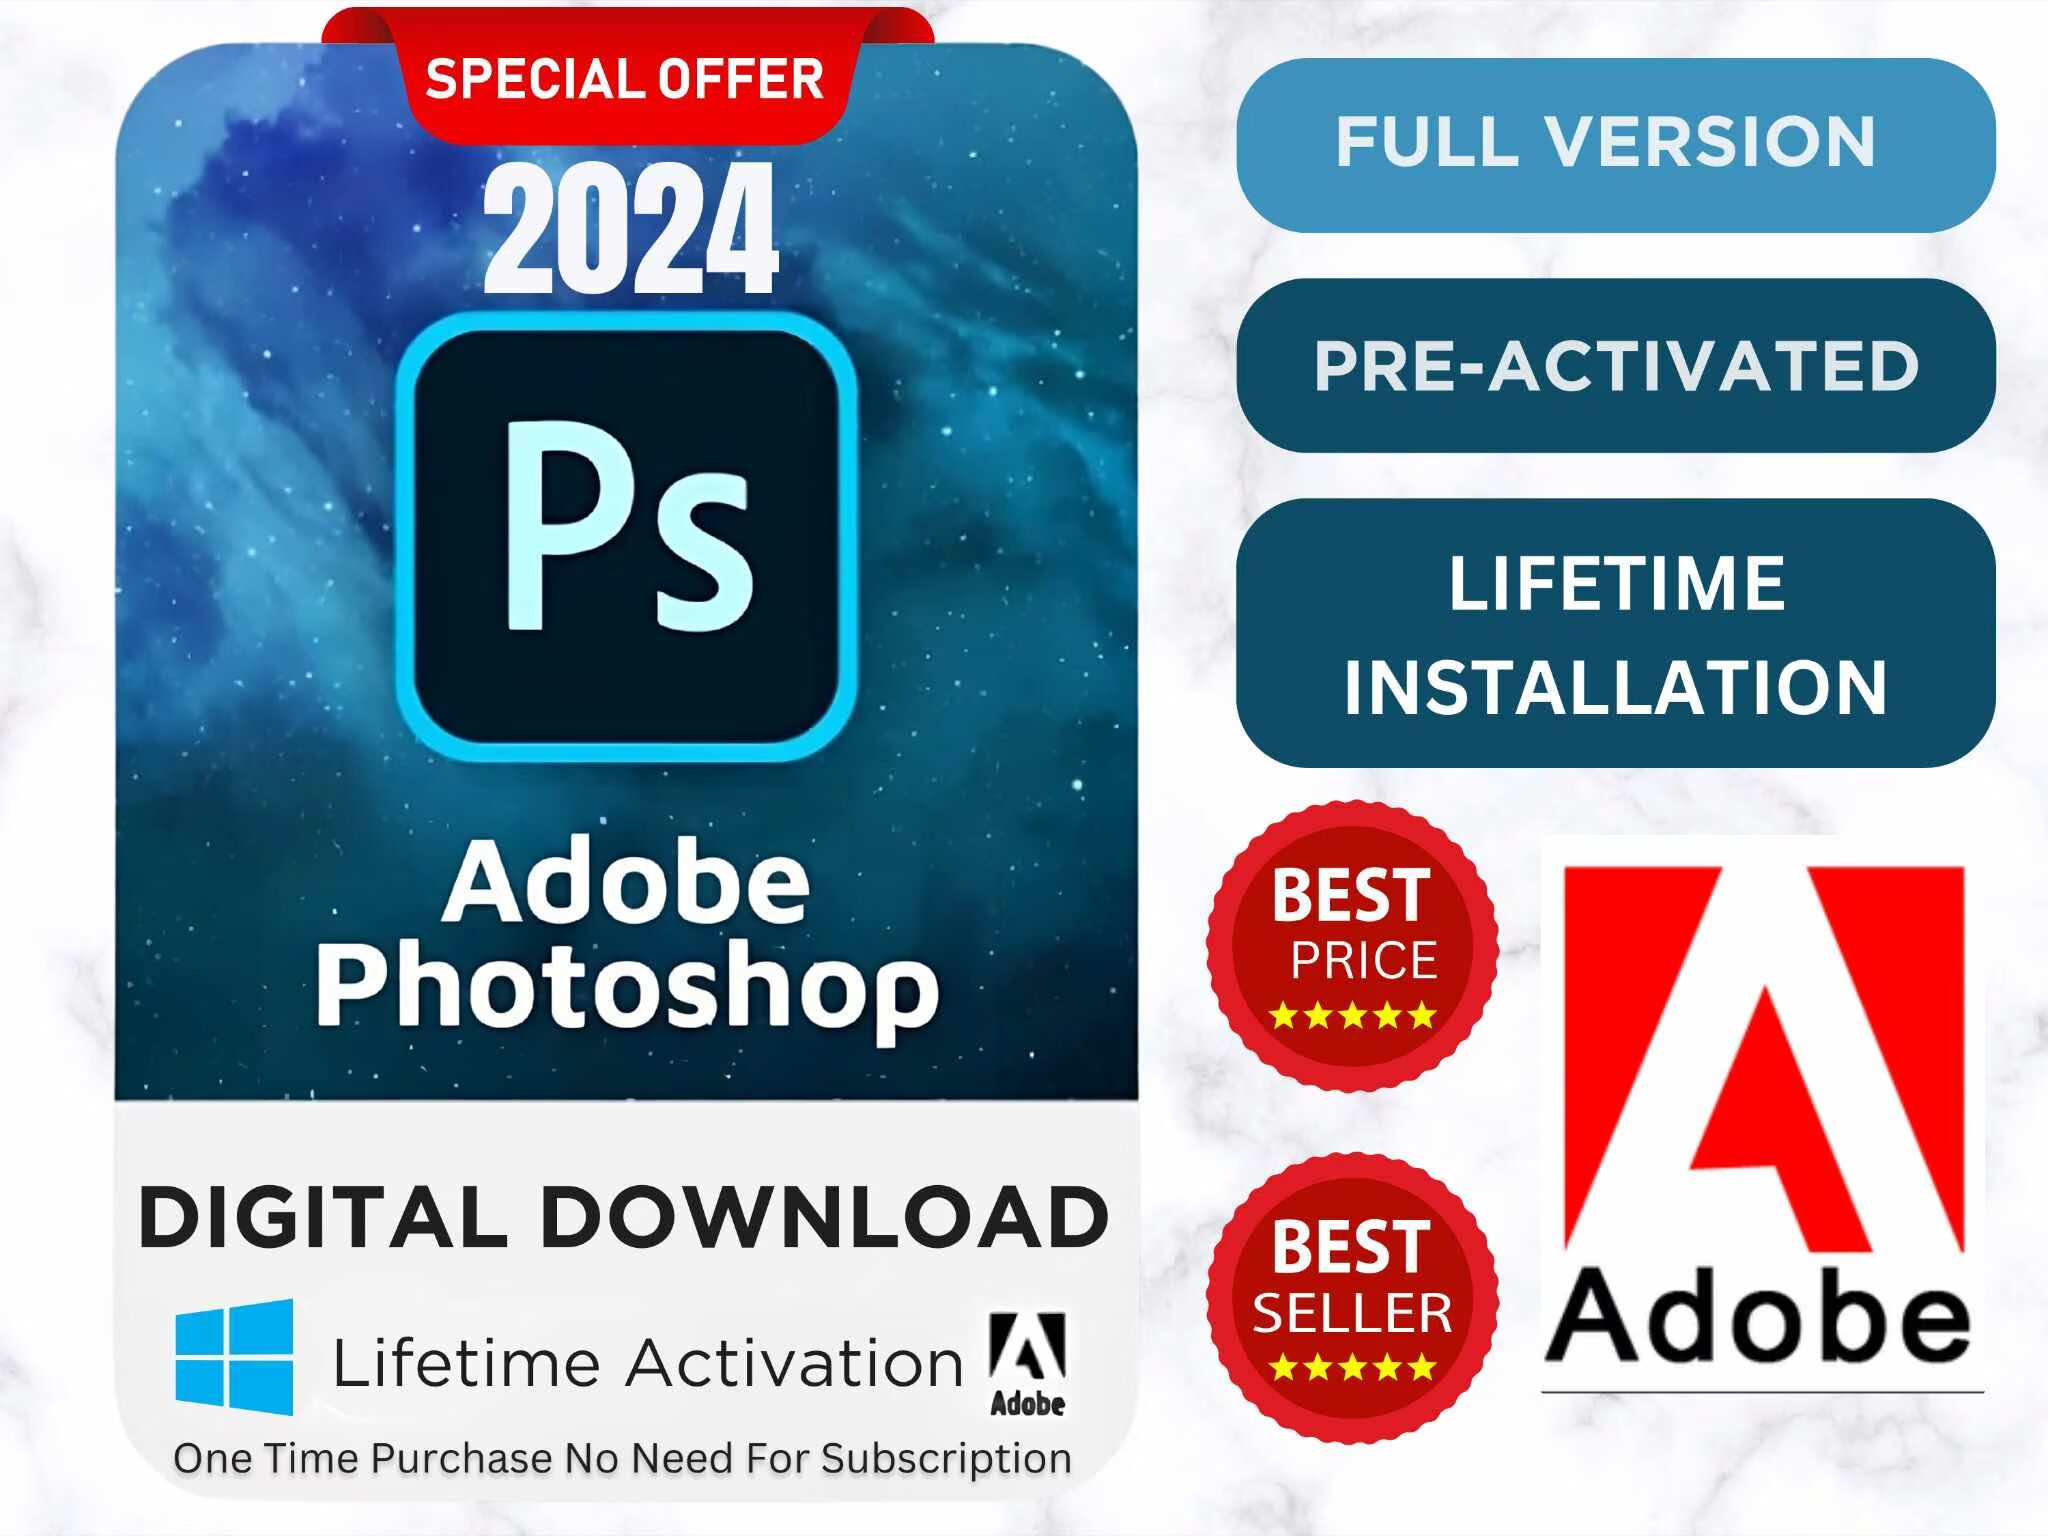 adobe photoshop pre-activated download